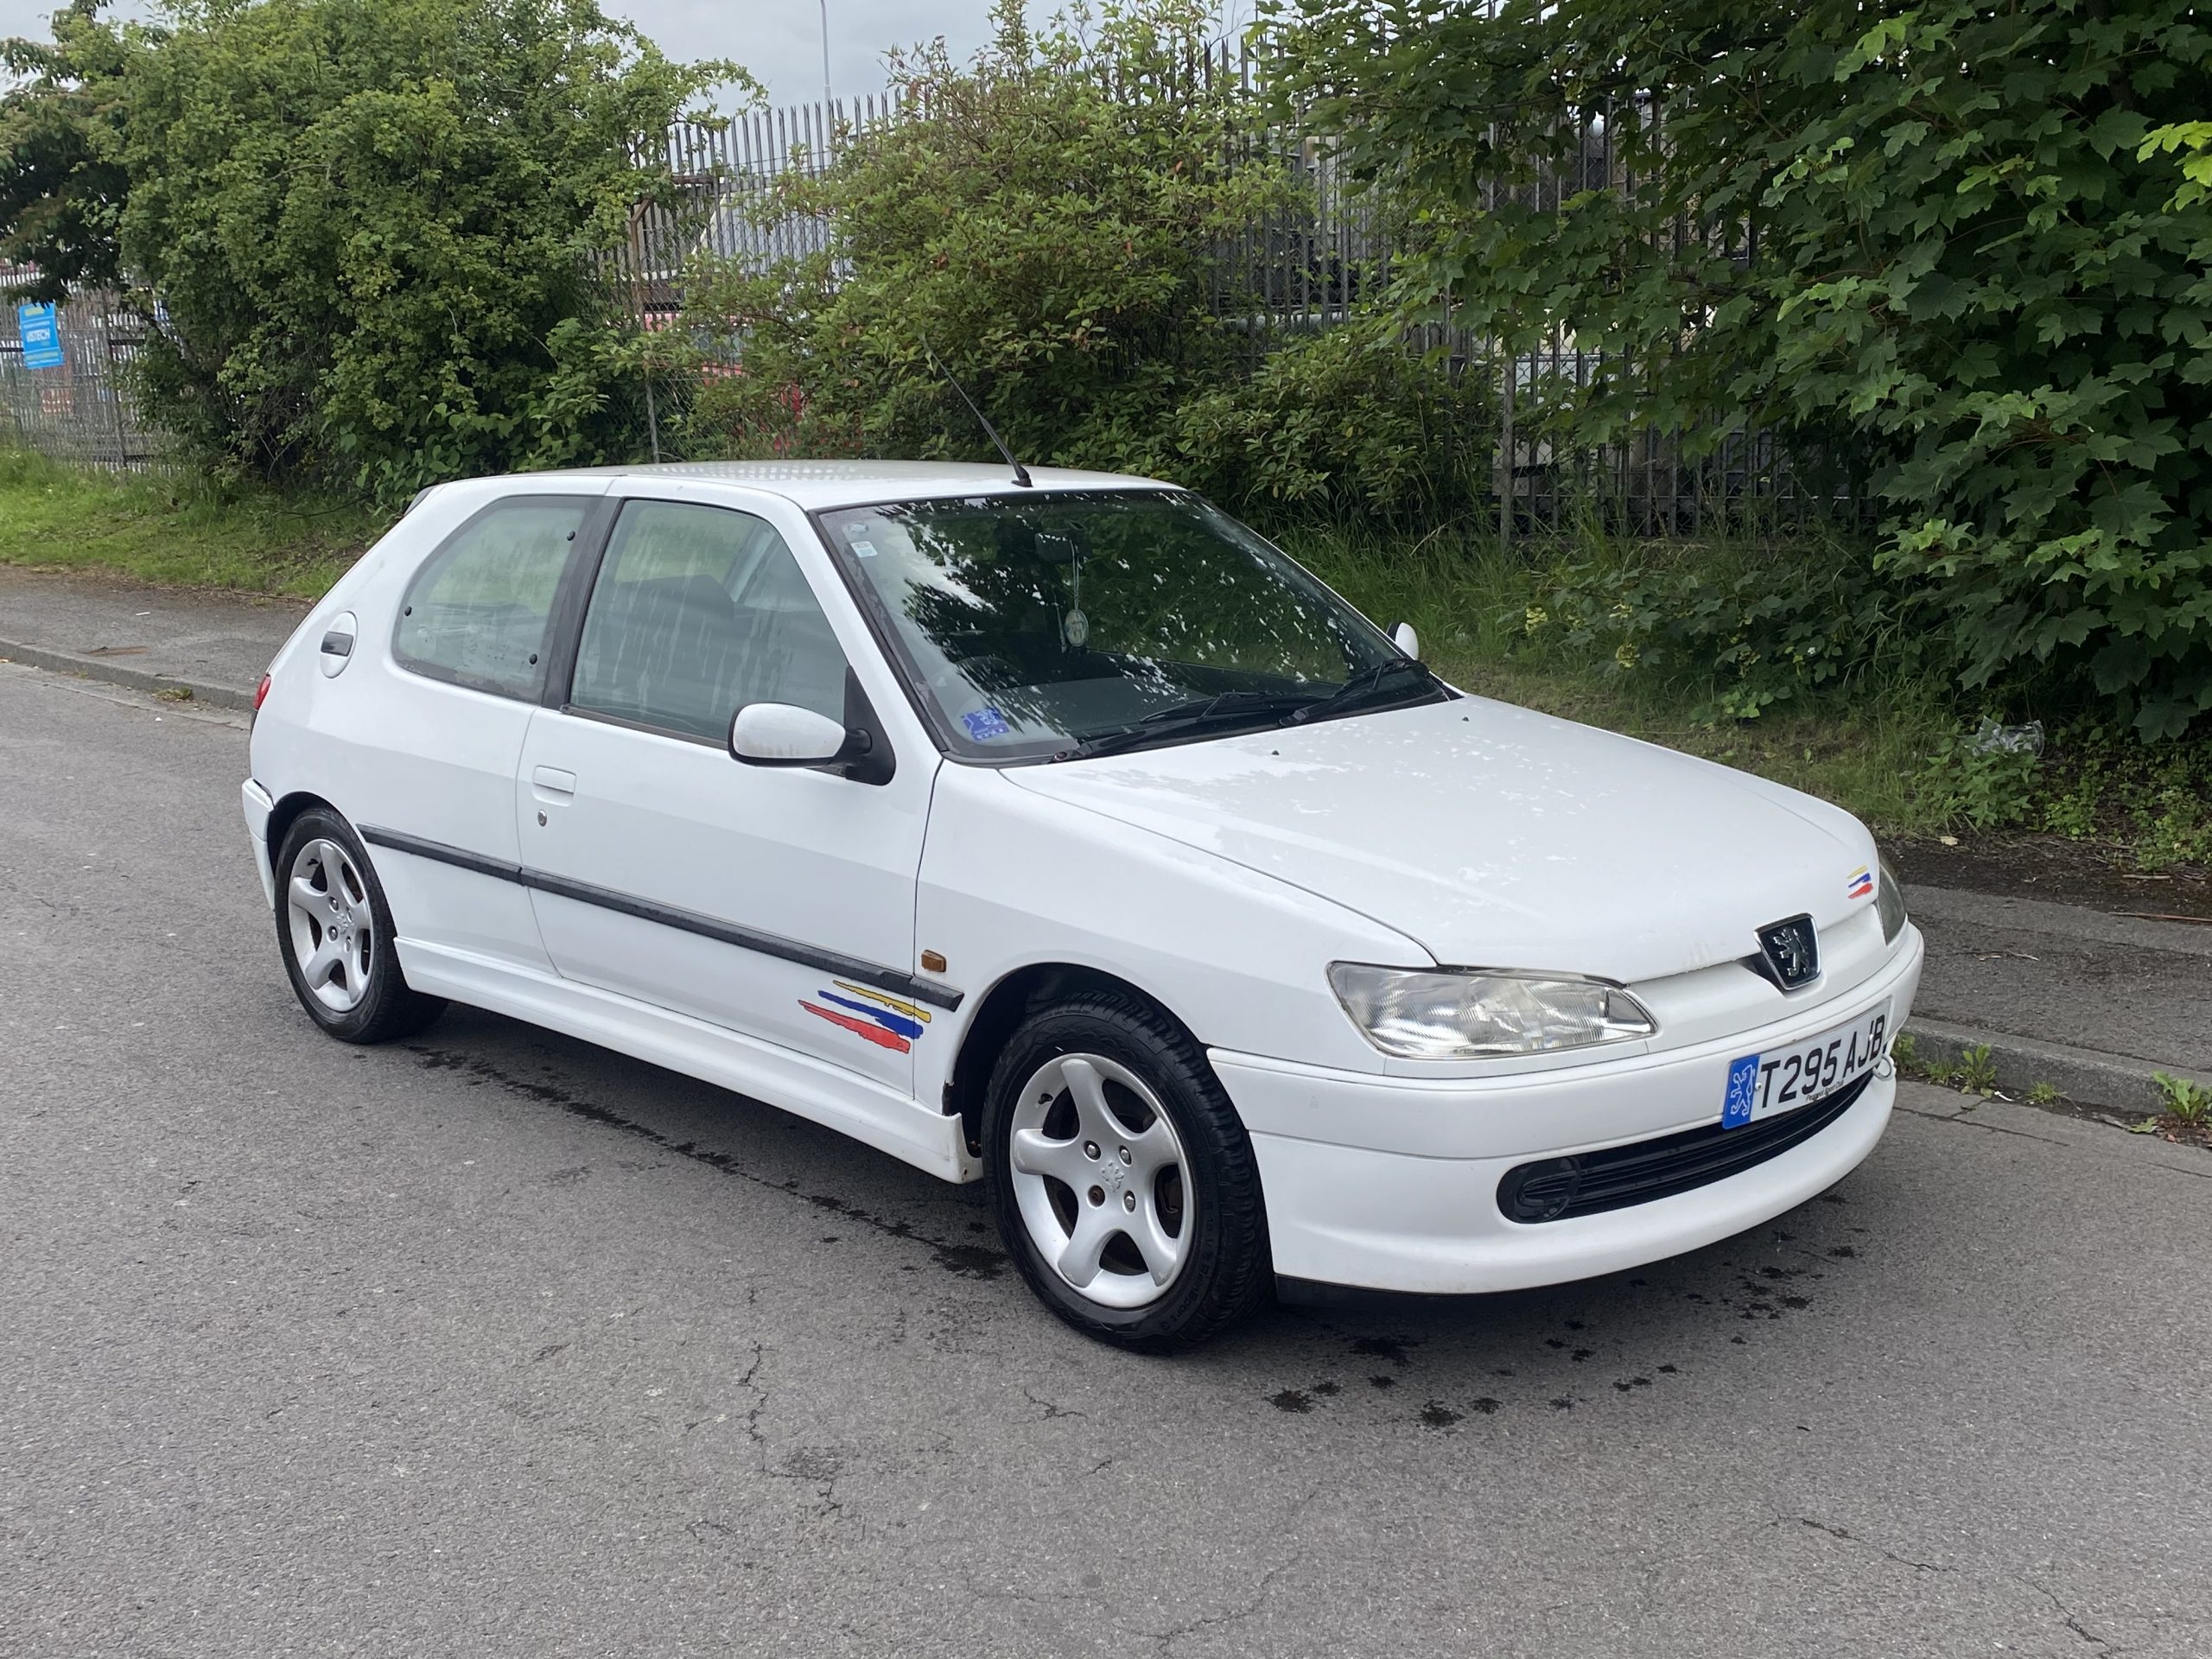 Peugeot 306 - Classic Car Review - Buying Guide